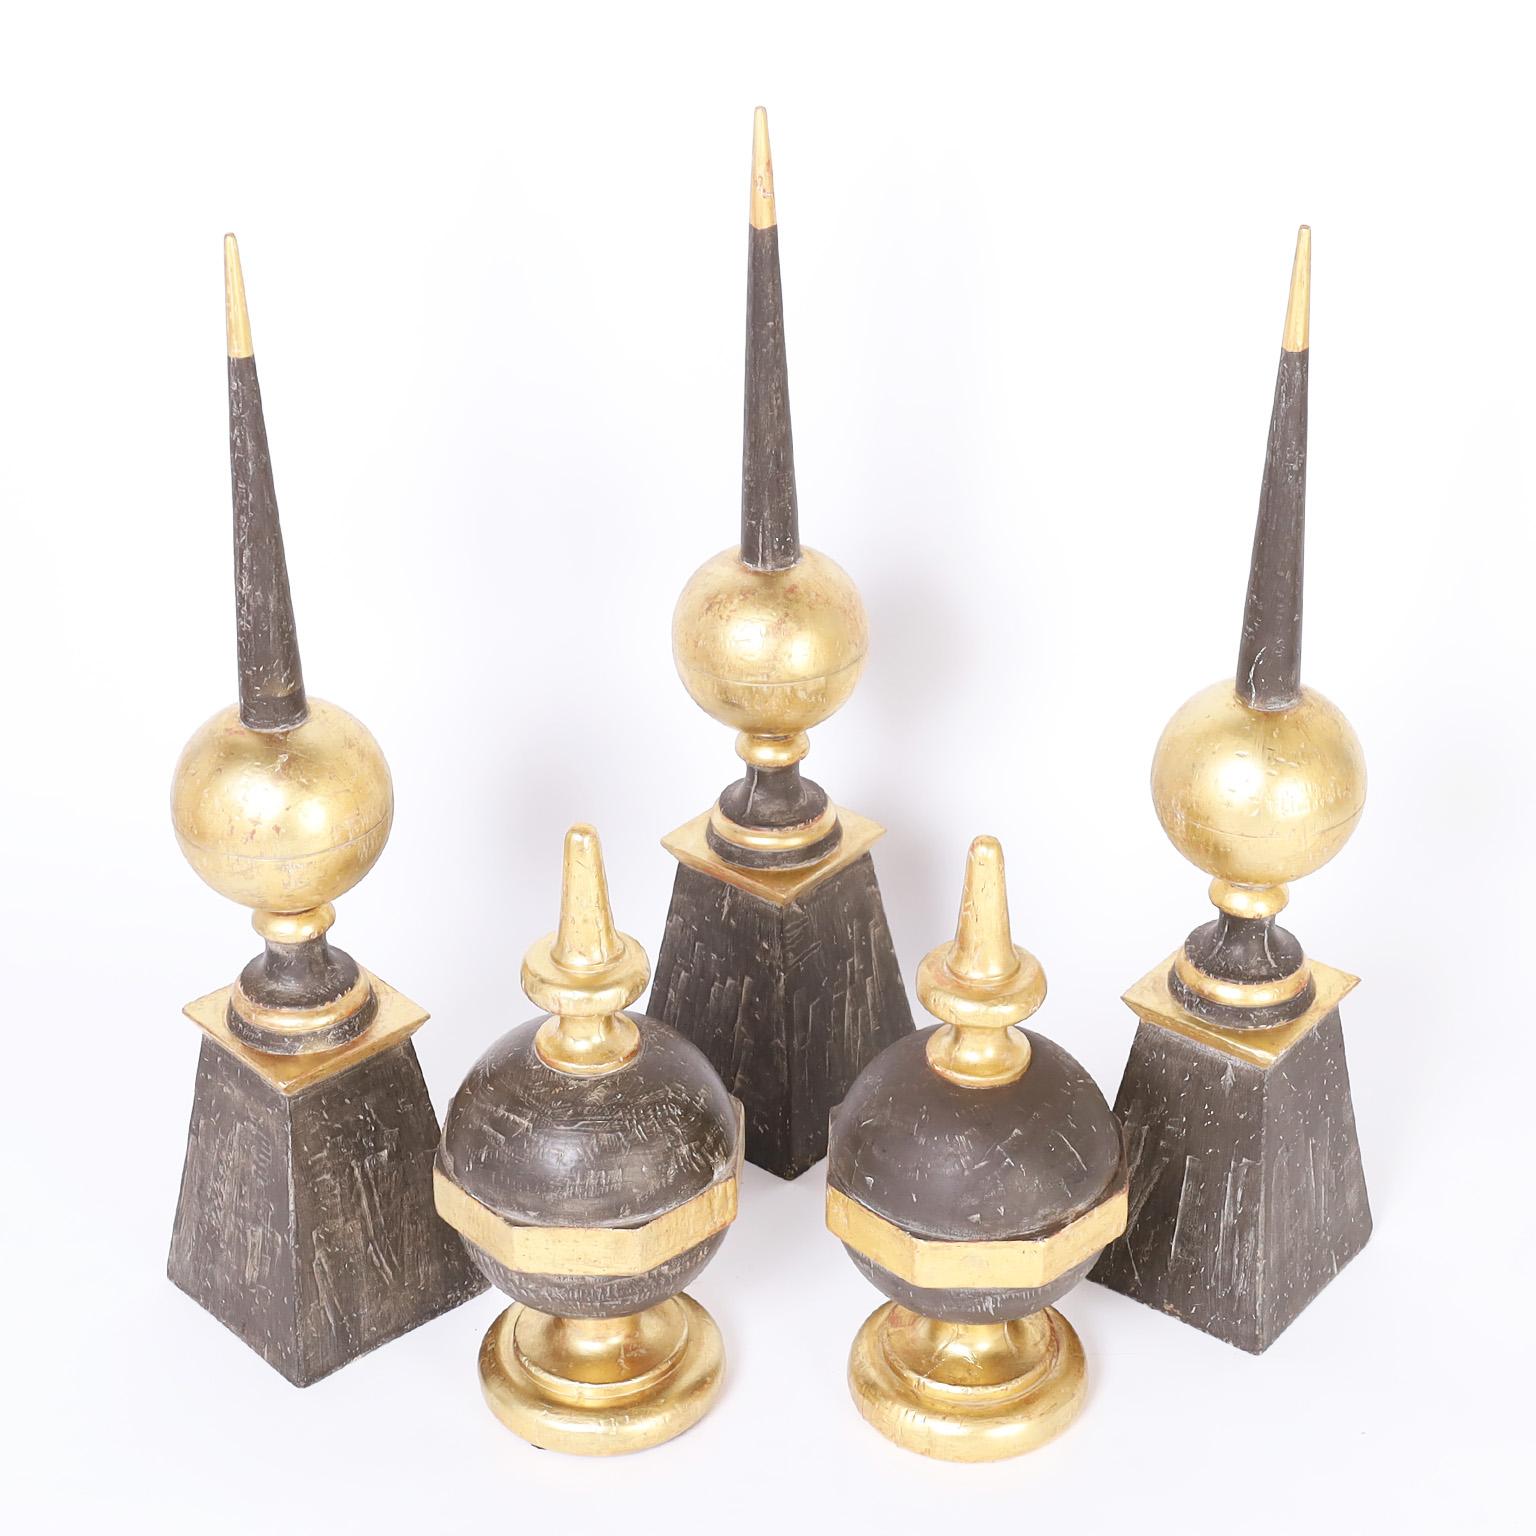 Collection of five wood finials turned and cut with classic form having contrived distressed paint and gold leaf by Las Palmas. Priced individually. 

Taller finials- H: 32.5 W: 7 D: 7 $1,950 each

Shorter finials- H: 18 W: 7 D: 7 $1050.